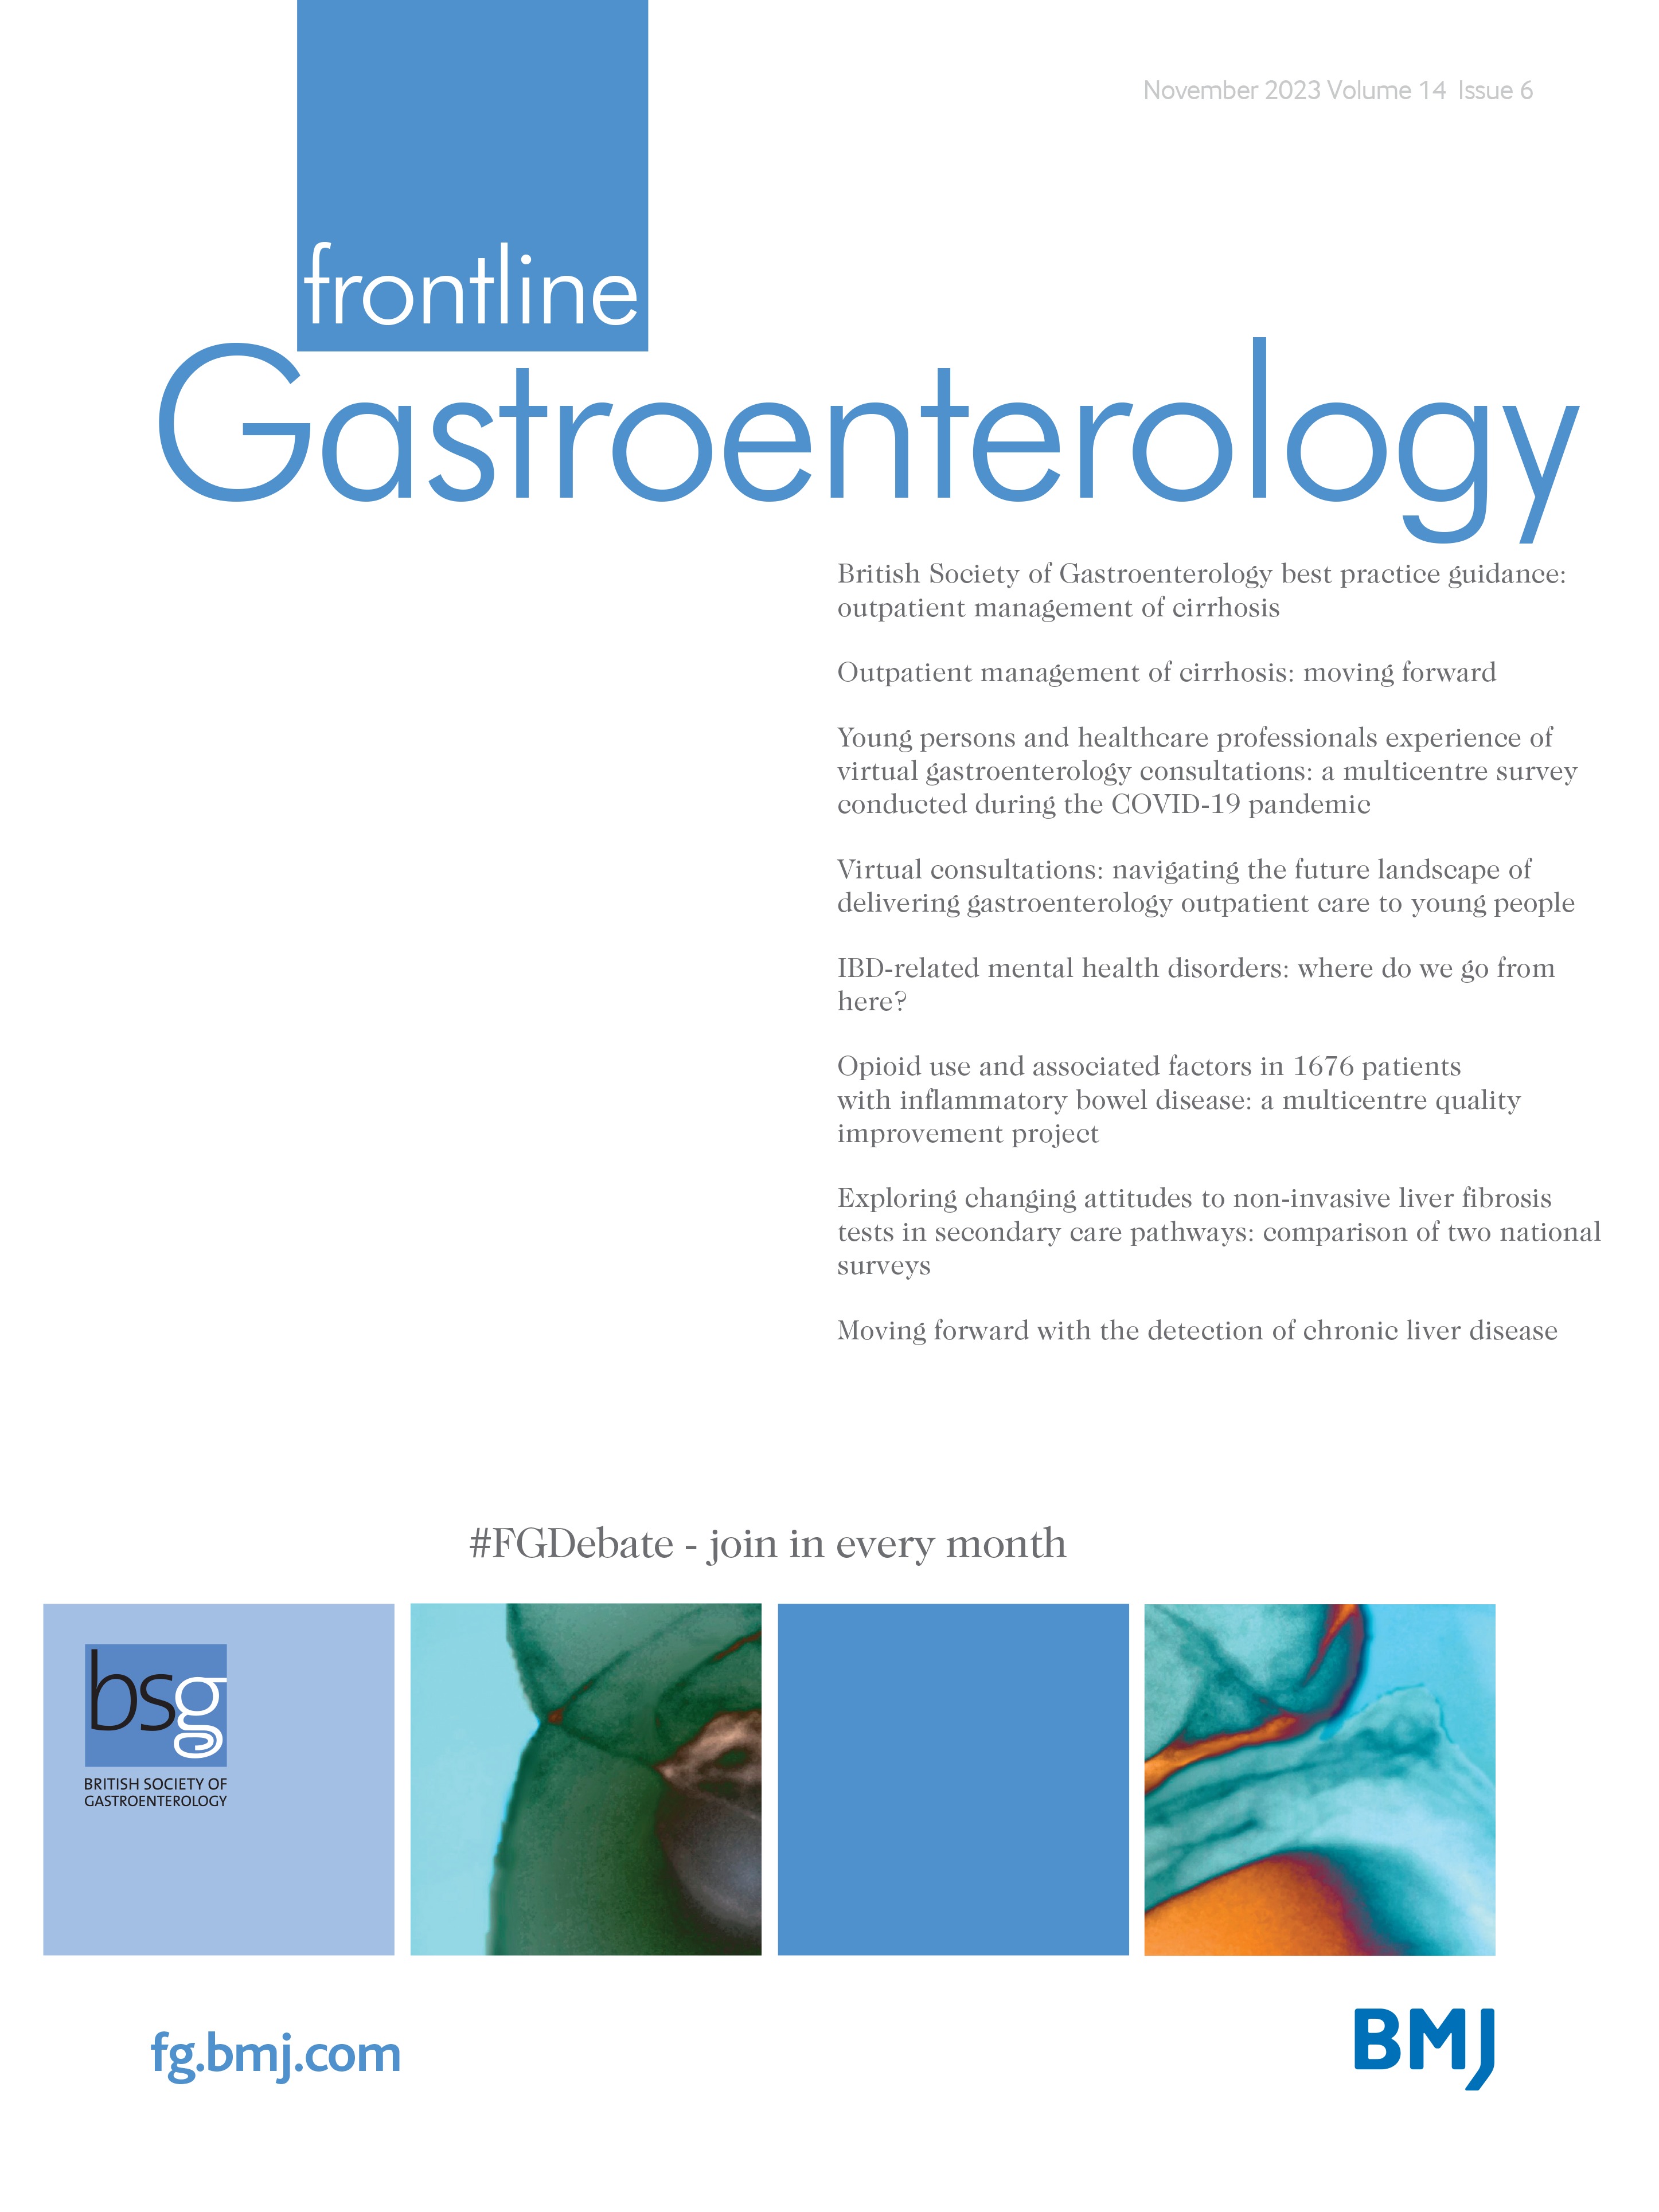 Young persons and healthcare professionals experience of virtual gastroenterology consultations: a multicentre survey conducted during the COVID-19 pandemic